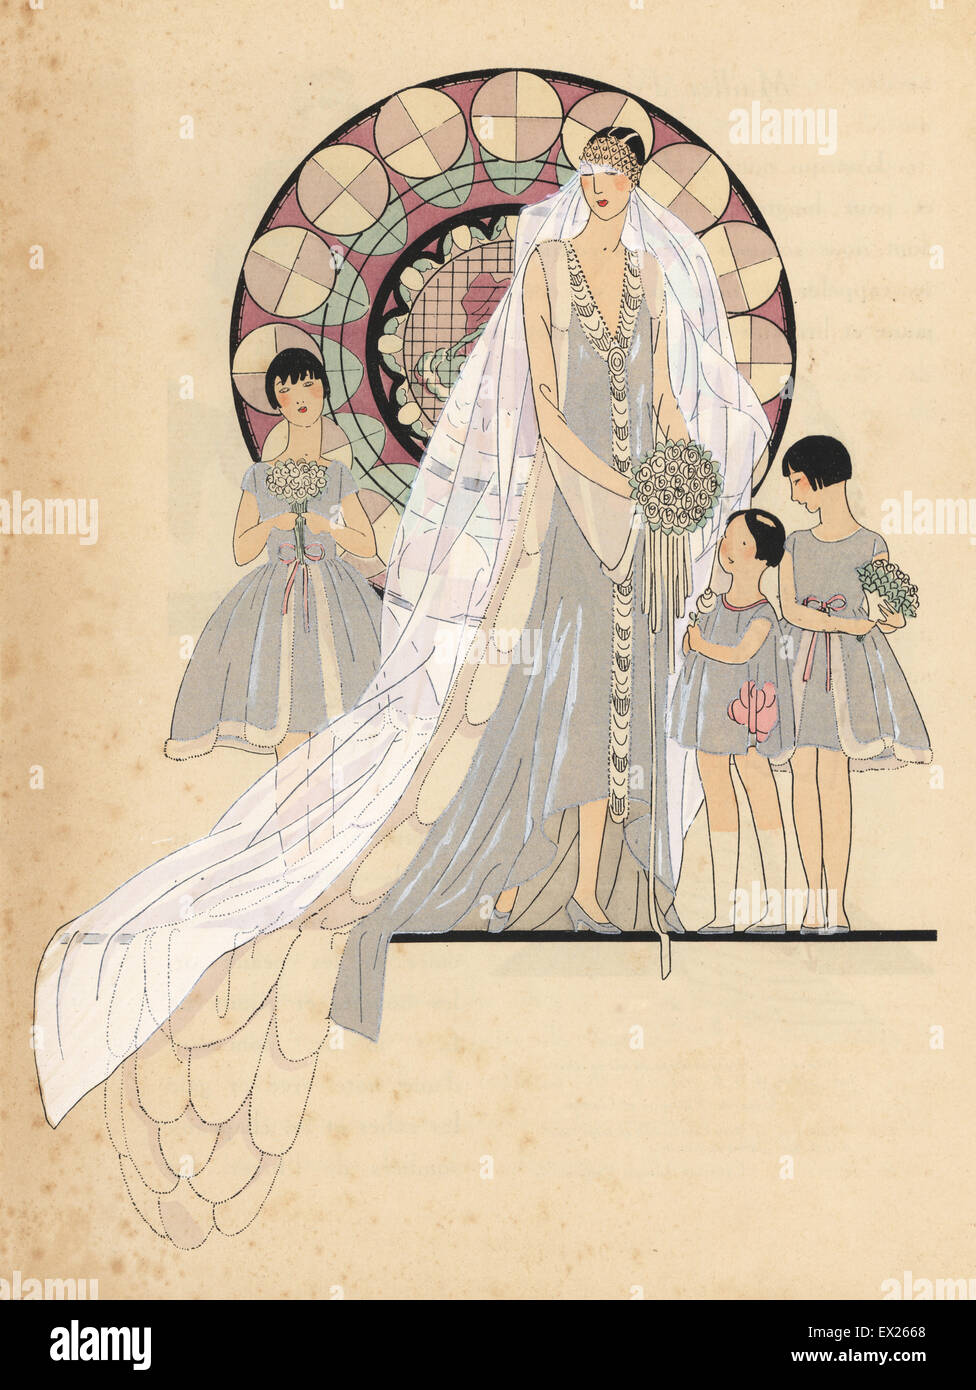 Bride in wedding dress with bridesmaids in matching outfits by Jeanne Lanvin. Lithograph with pochoir (stencil) handcolour from the luxury fashion magazine Art, Gout, Beaute, Paris, 1926. Stock Photo